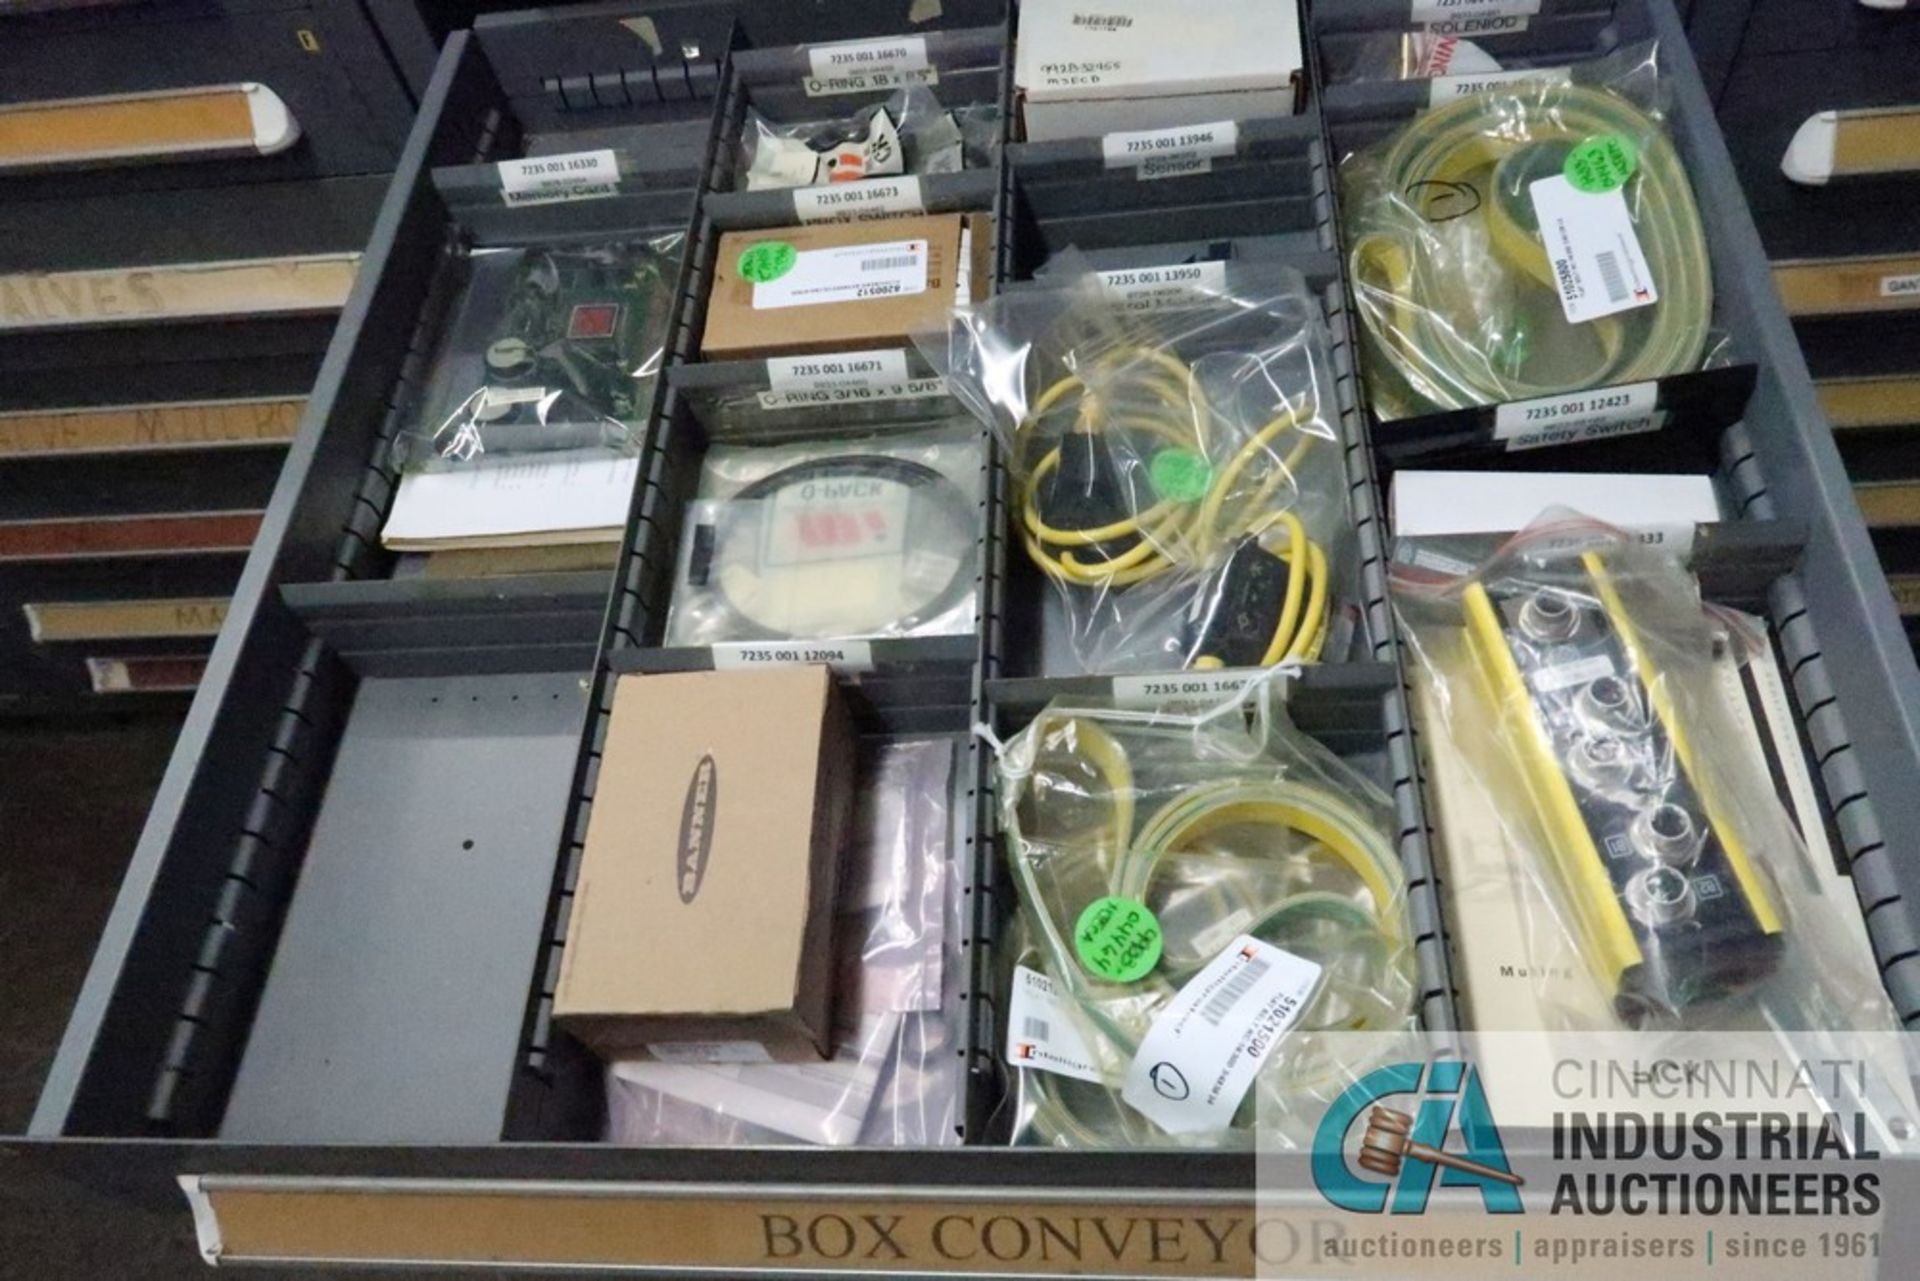 (LOT) 11-DRAWER VIDMAR CABINET WITH CONTENTS INCLUDING MISCELLANEOUS MICRO SWITCHES, BOX CONVEYOR - Image 8 of 12